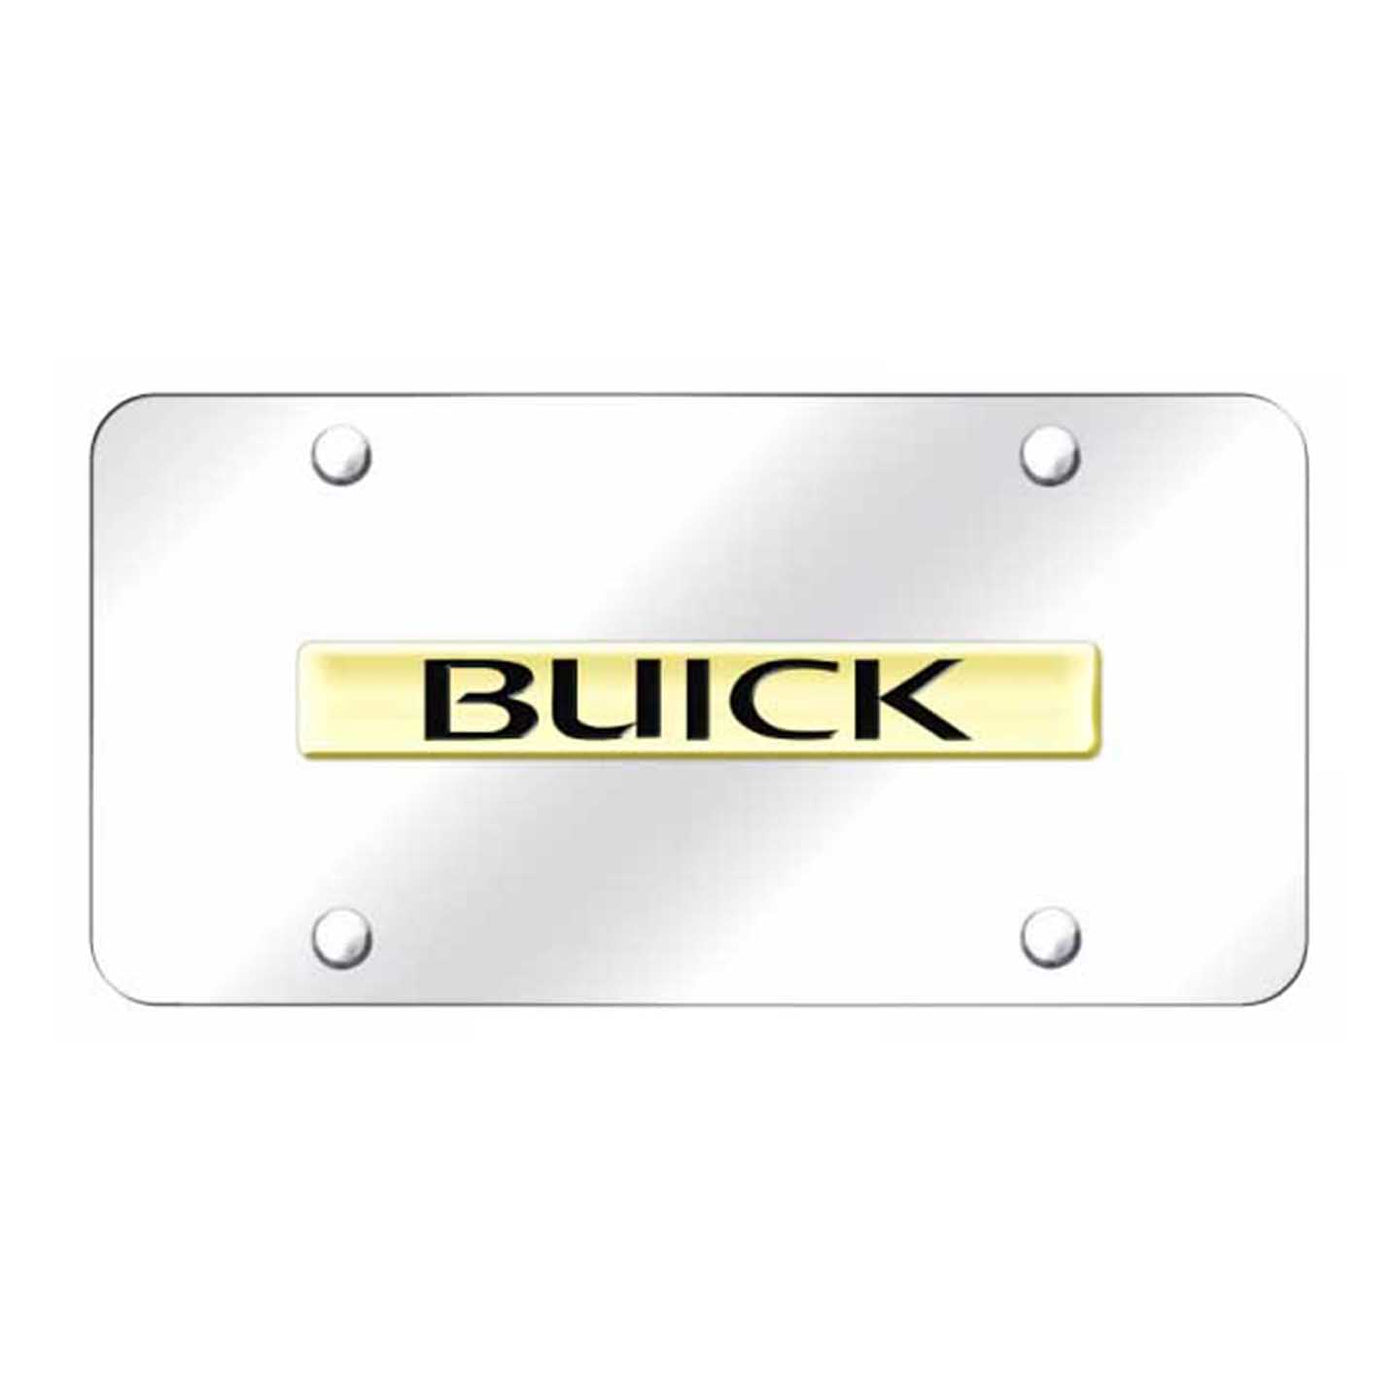 Buick Name License Plate - Gold on Mirrored